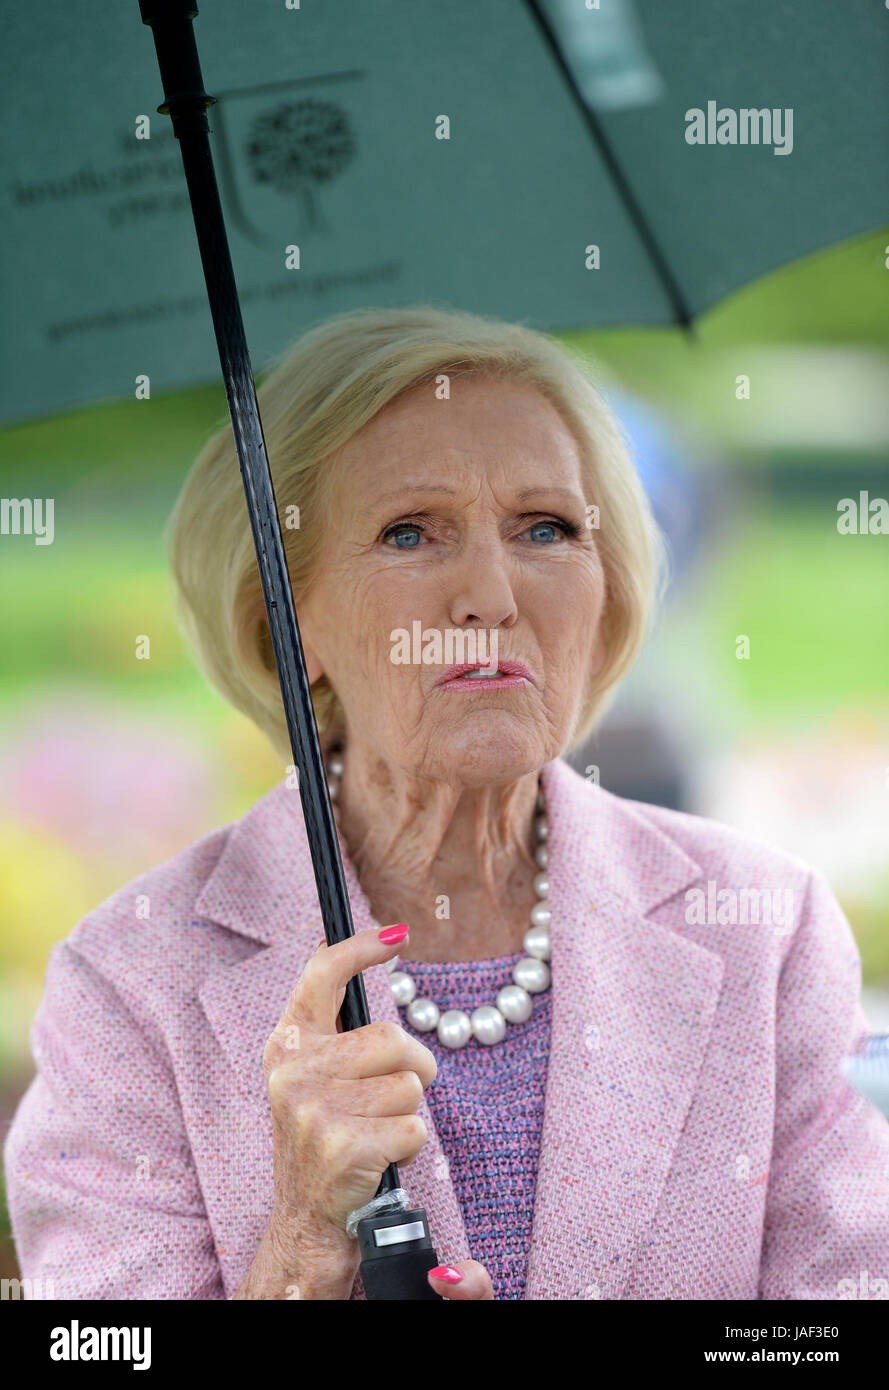 Chatsworth, UK. 06th June, 2017. 6th June 2017. Chatsworth Royal Horticultural Society Flower Show. Picture shows TV presenter Mary Berry sheltering under an umbrella after opening the Chatsworth Royal Horticultural Societies Flower Show at Chatsworth House in Derbyshire, shortly before the show was closed for the day because of adverse weather. Credit: Howard Walker/Alamy Live News Stock Photo